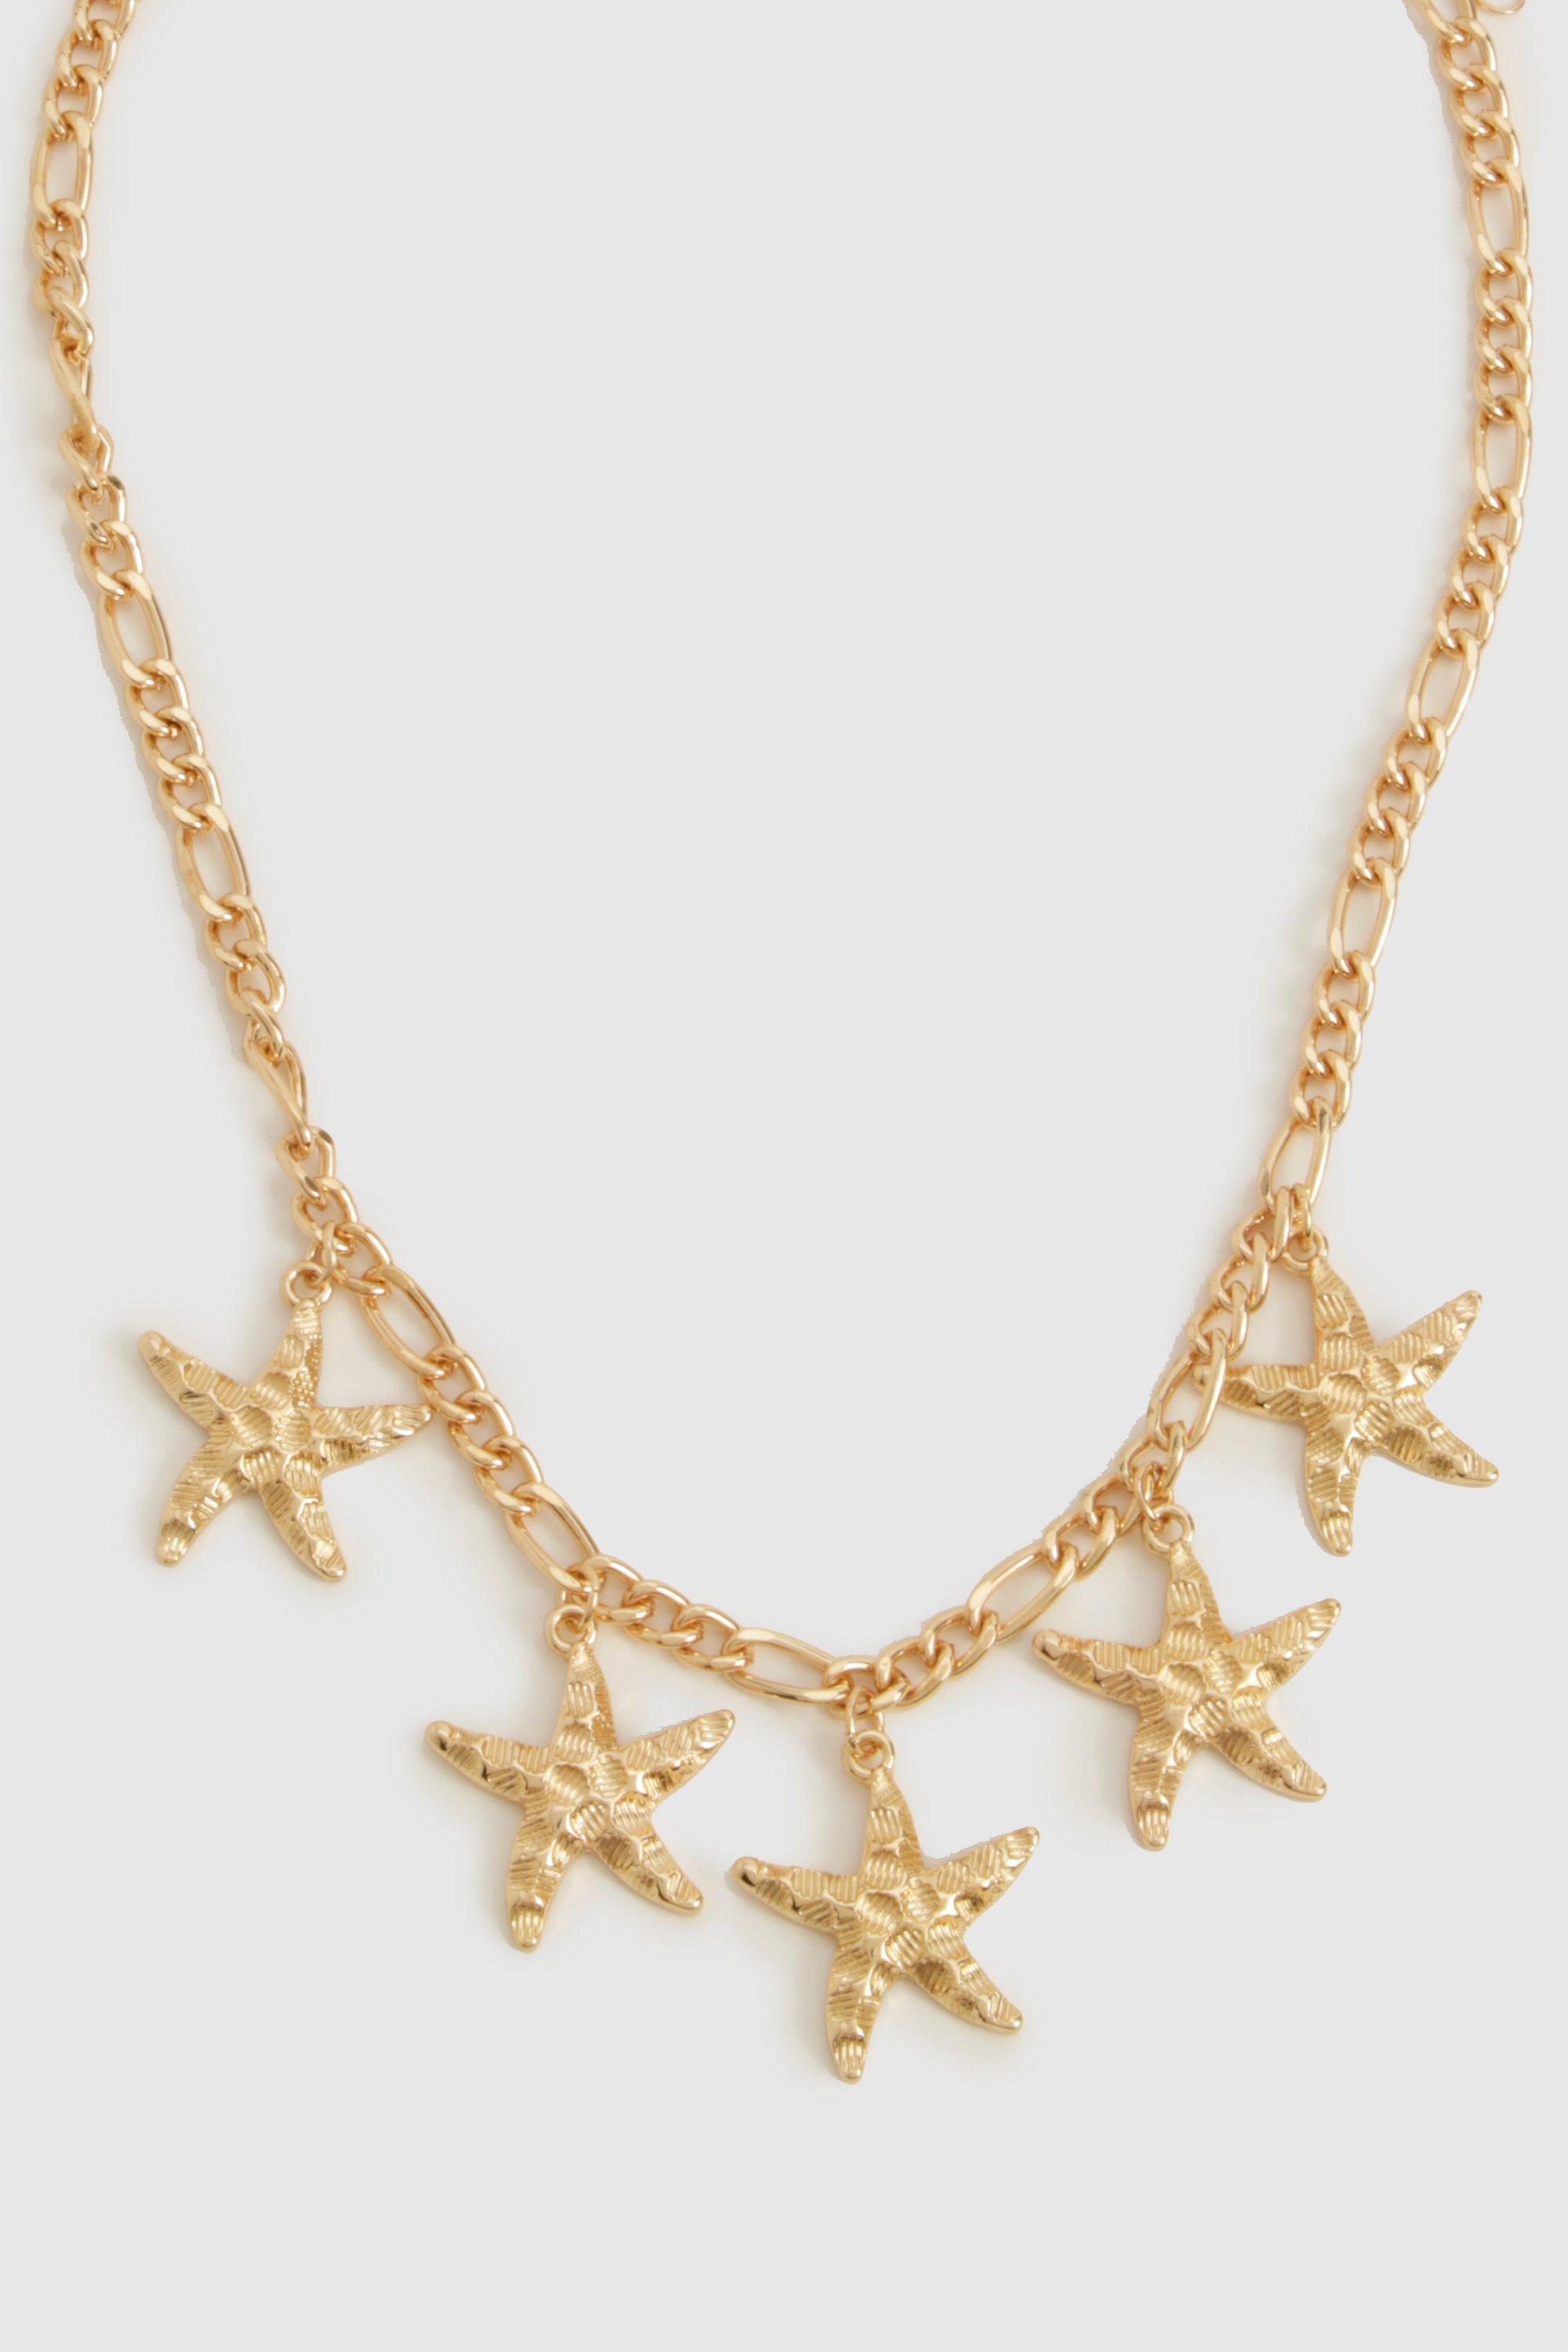 Image of Starfish Scattered Necklace, Metallics